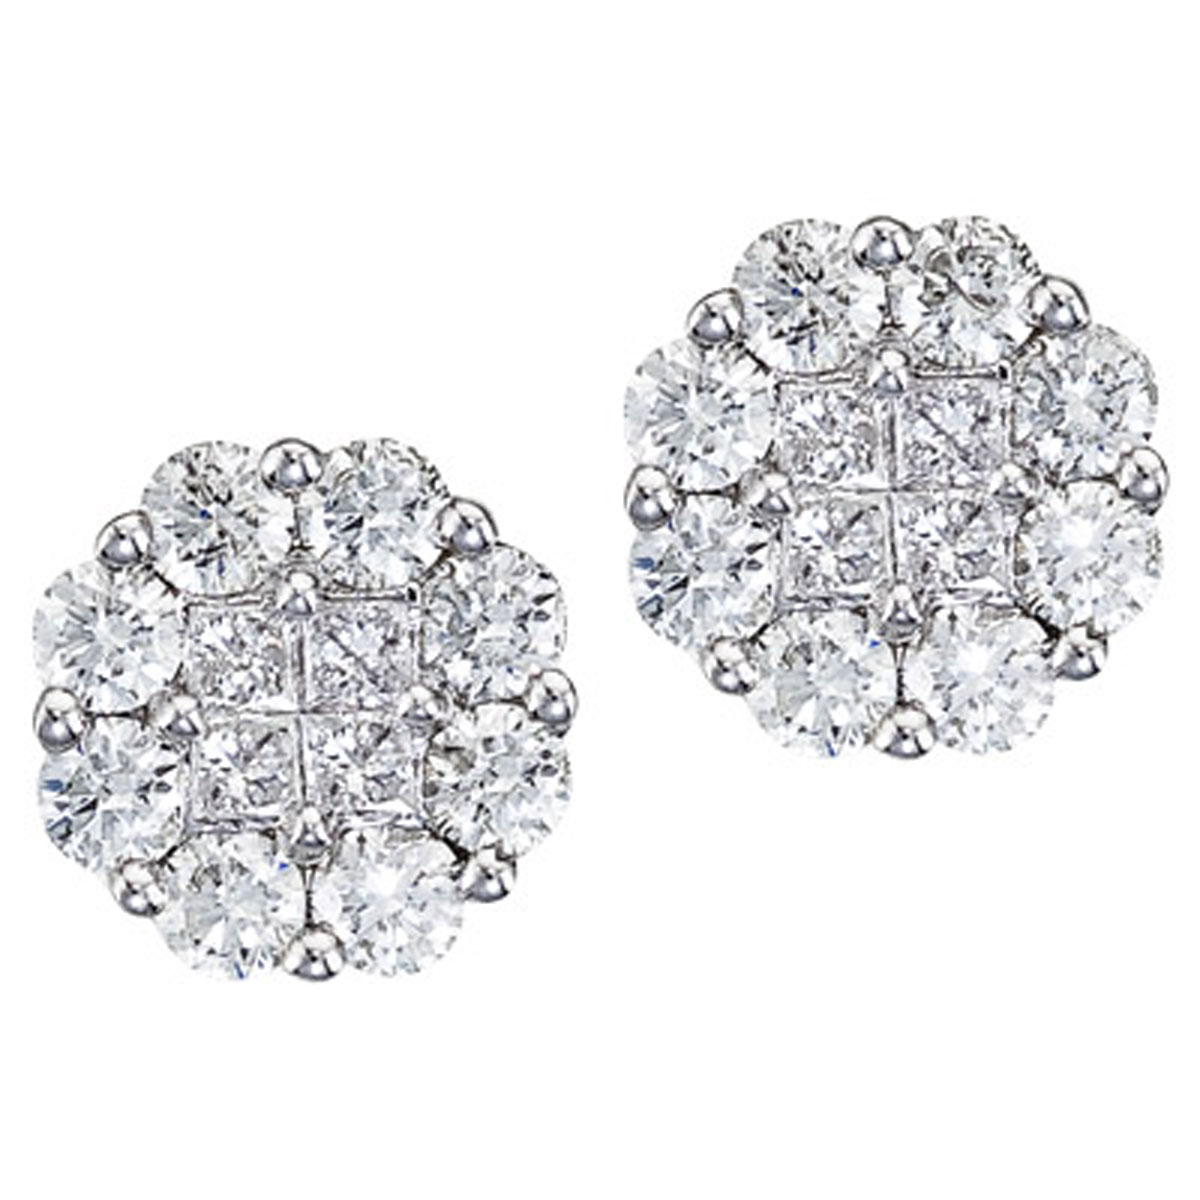 JCX2484: Gorgeous 14k white gold earrings with 1.50 total carats of shimmering genuine diamonds. Clustaires give all the sparkling elegence of a solitaire at a fraction of the price.